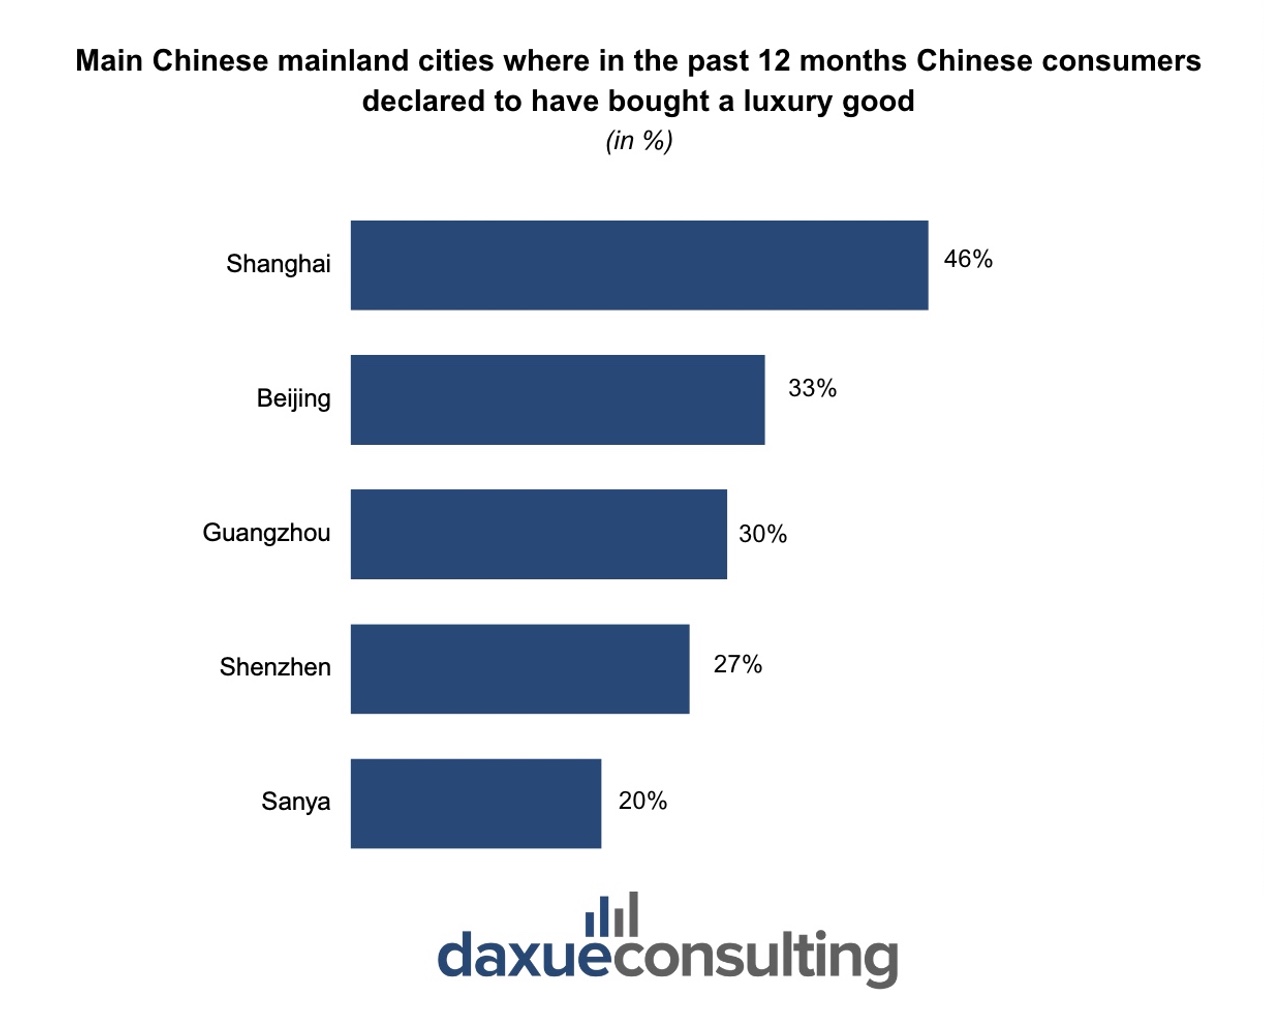 Main cities in Mainland China where Chinese consumers have declared to have bought a luxury good.